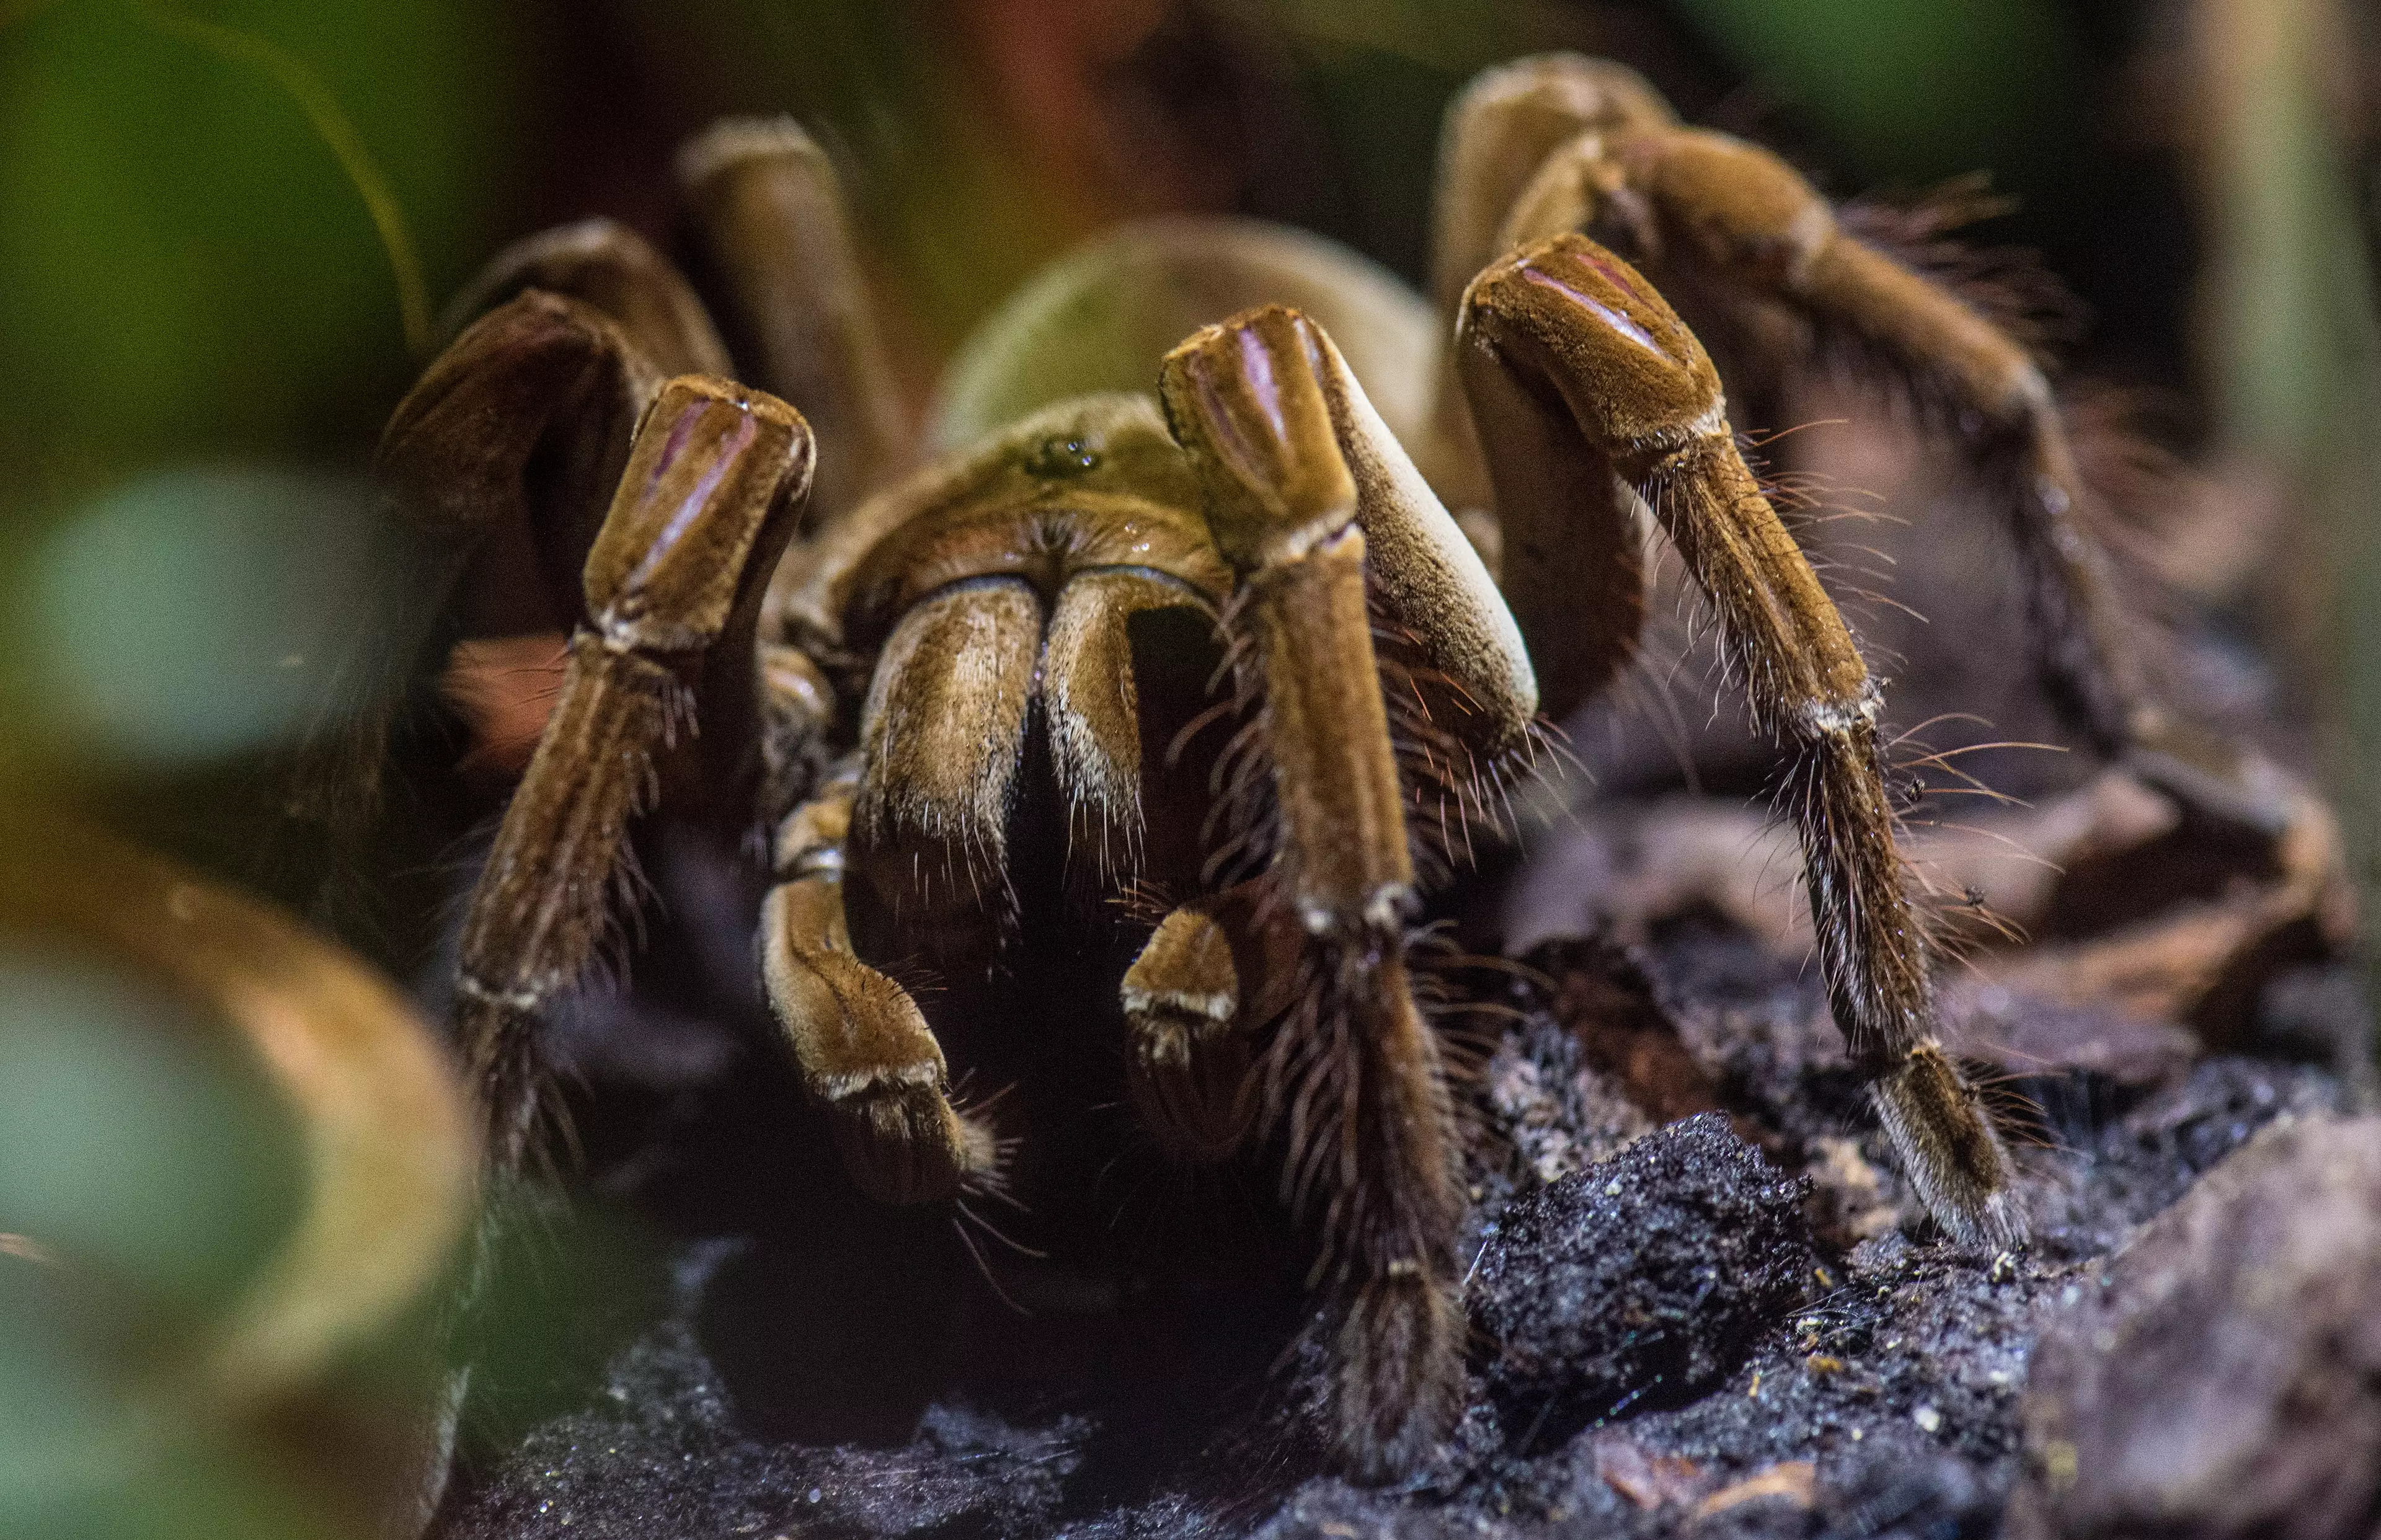 Venomous Tarantulas Could Be On The Loose In The Derbyshire Countryside